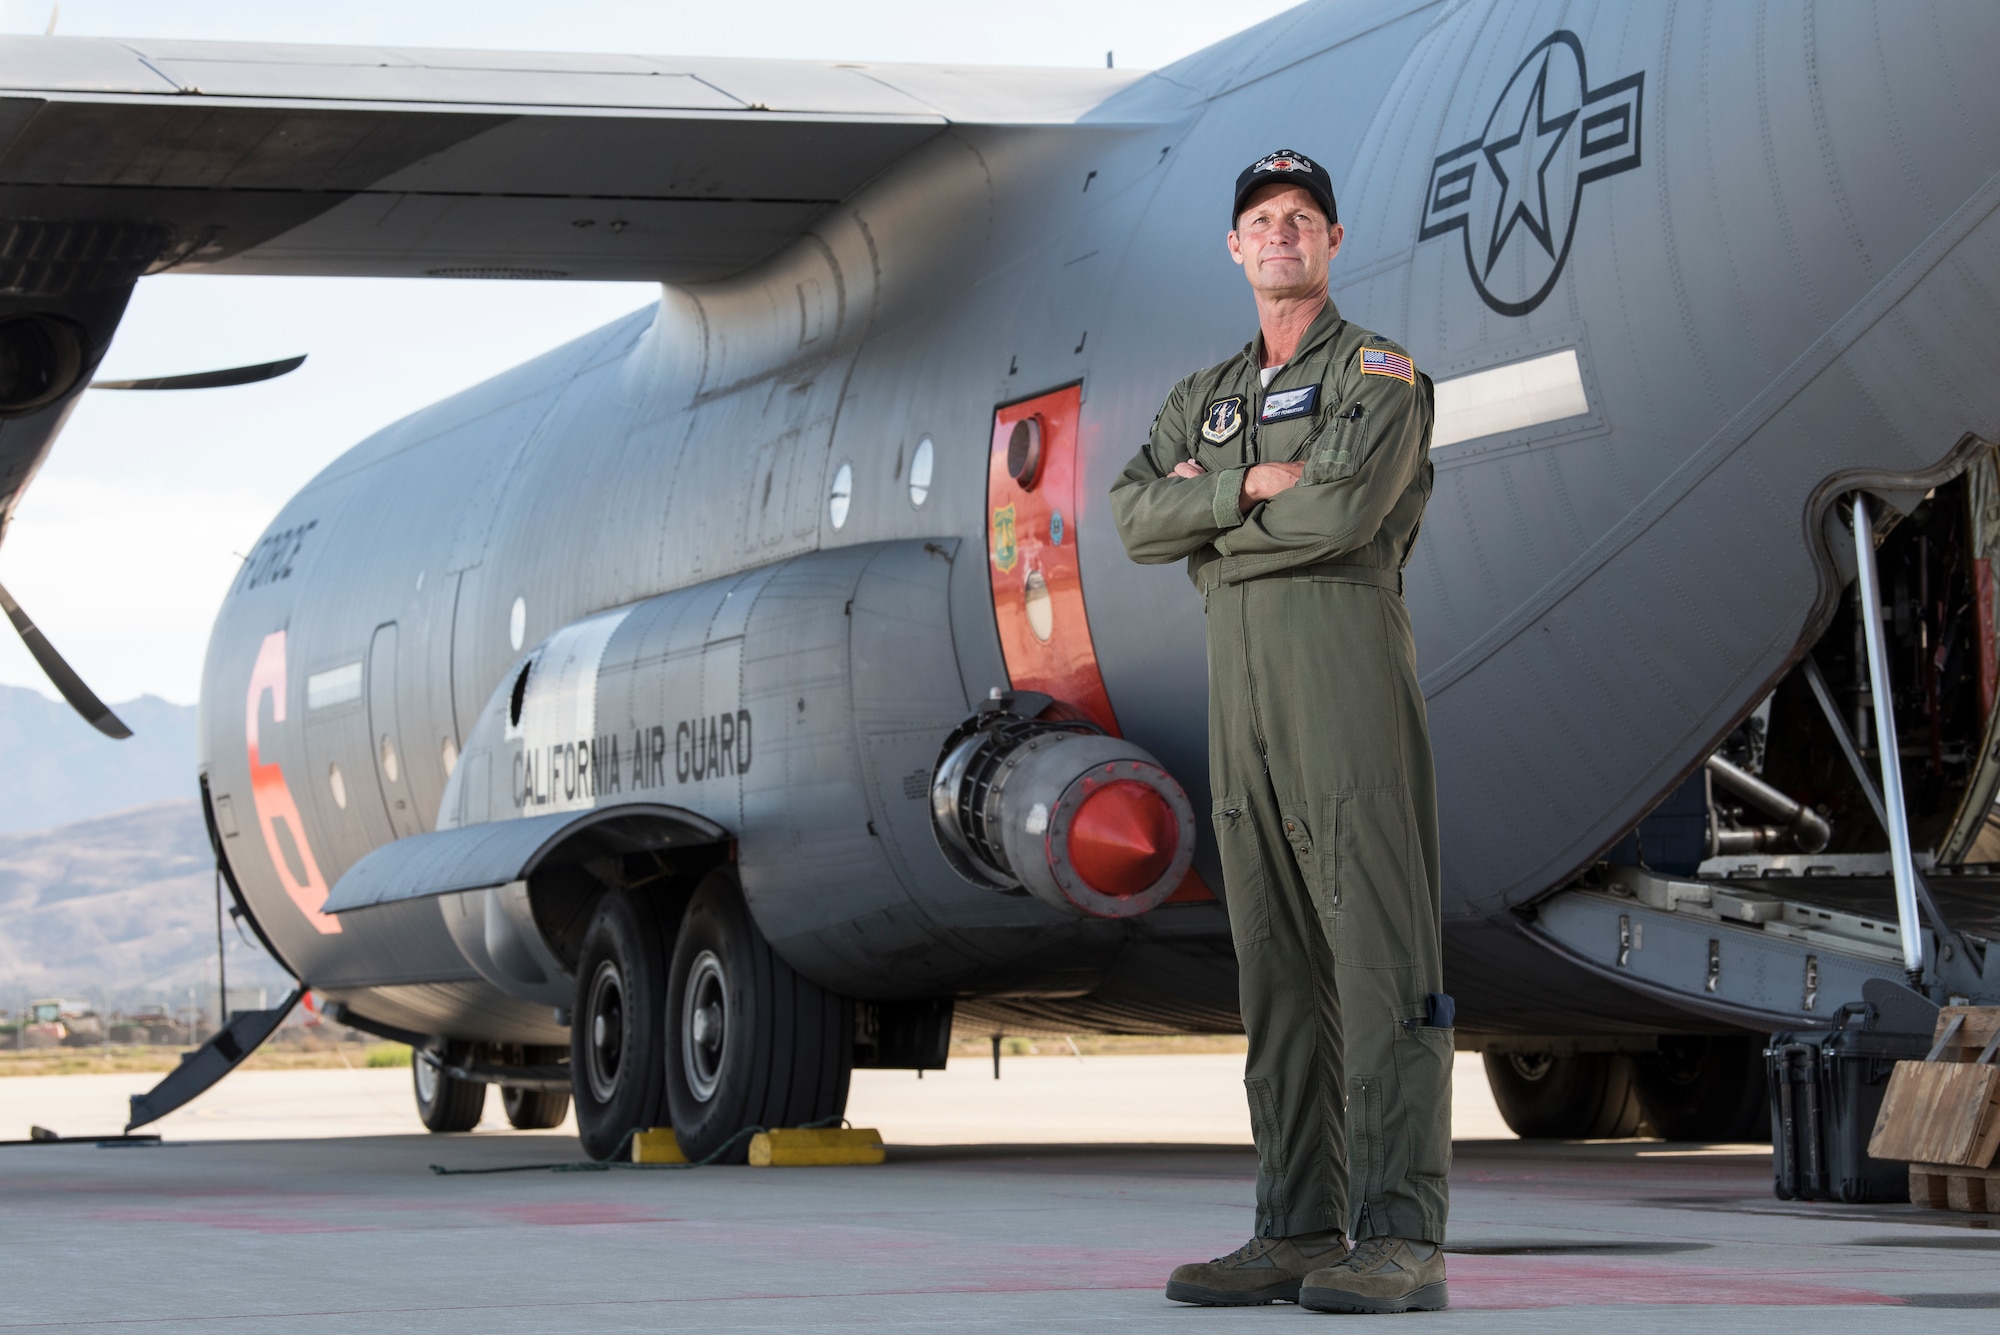 Lt. Col. Scott Pemberton, a C-130J pilot with the 146th Airlift Wing, has been with the 146th for 30 years and has lived in the Ventura/Santa Barbara, California community for about 48.  He has been flying the modular airborne fire fighting system for approximately 20 years. The 146th was activated Dec.5, 2017, to support CAL FIRE with wildfire suppression efforts within the state. (U.S. Air Force photo/Master Sgt. Brian Ferguson)